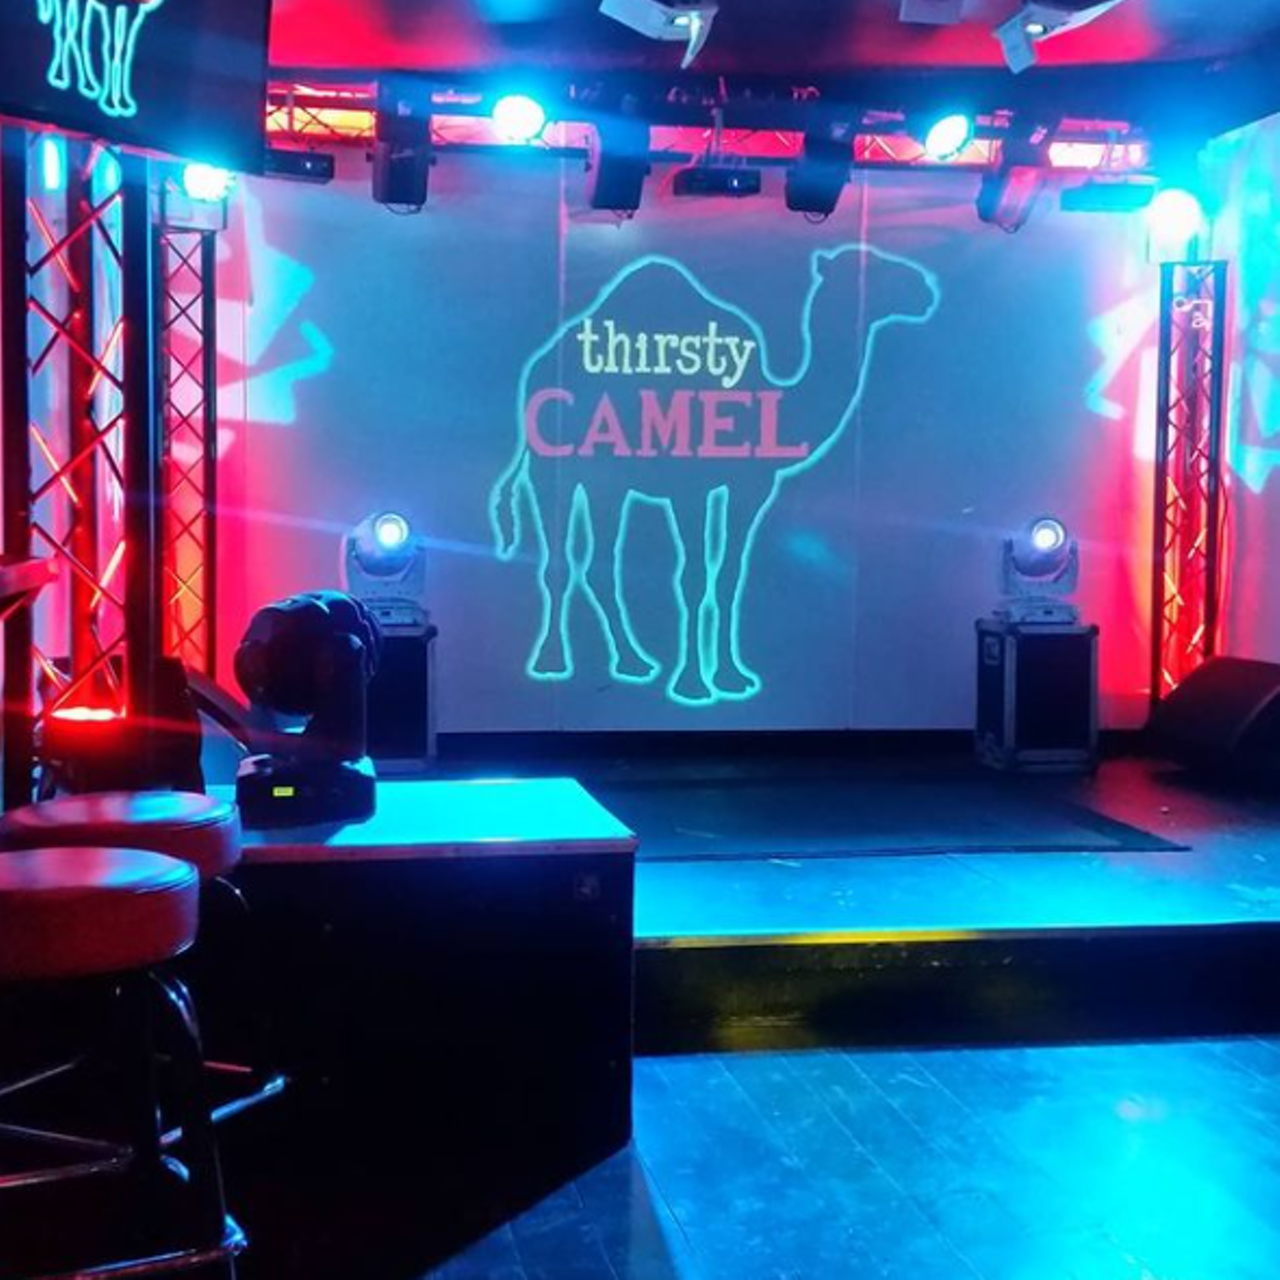 Thirsty Camel Bar
5307 McCullough Ave, (210) 780-0669, facebook.com/ThirstyCamelBar
While it’s easy to make friends here thanks to karaoke roulette, you don’t have to worry about running into folks you don’t want to see. This Olmos Park nightclub is a hoppin’ spot for live music and more, and is complete with a full bar. If you find the weather nice, there’s also space outside for you to sit back with a drink in hand.
Photo via Instagram / mksejdooley